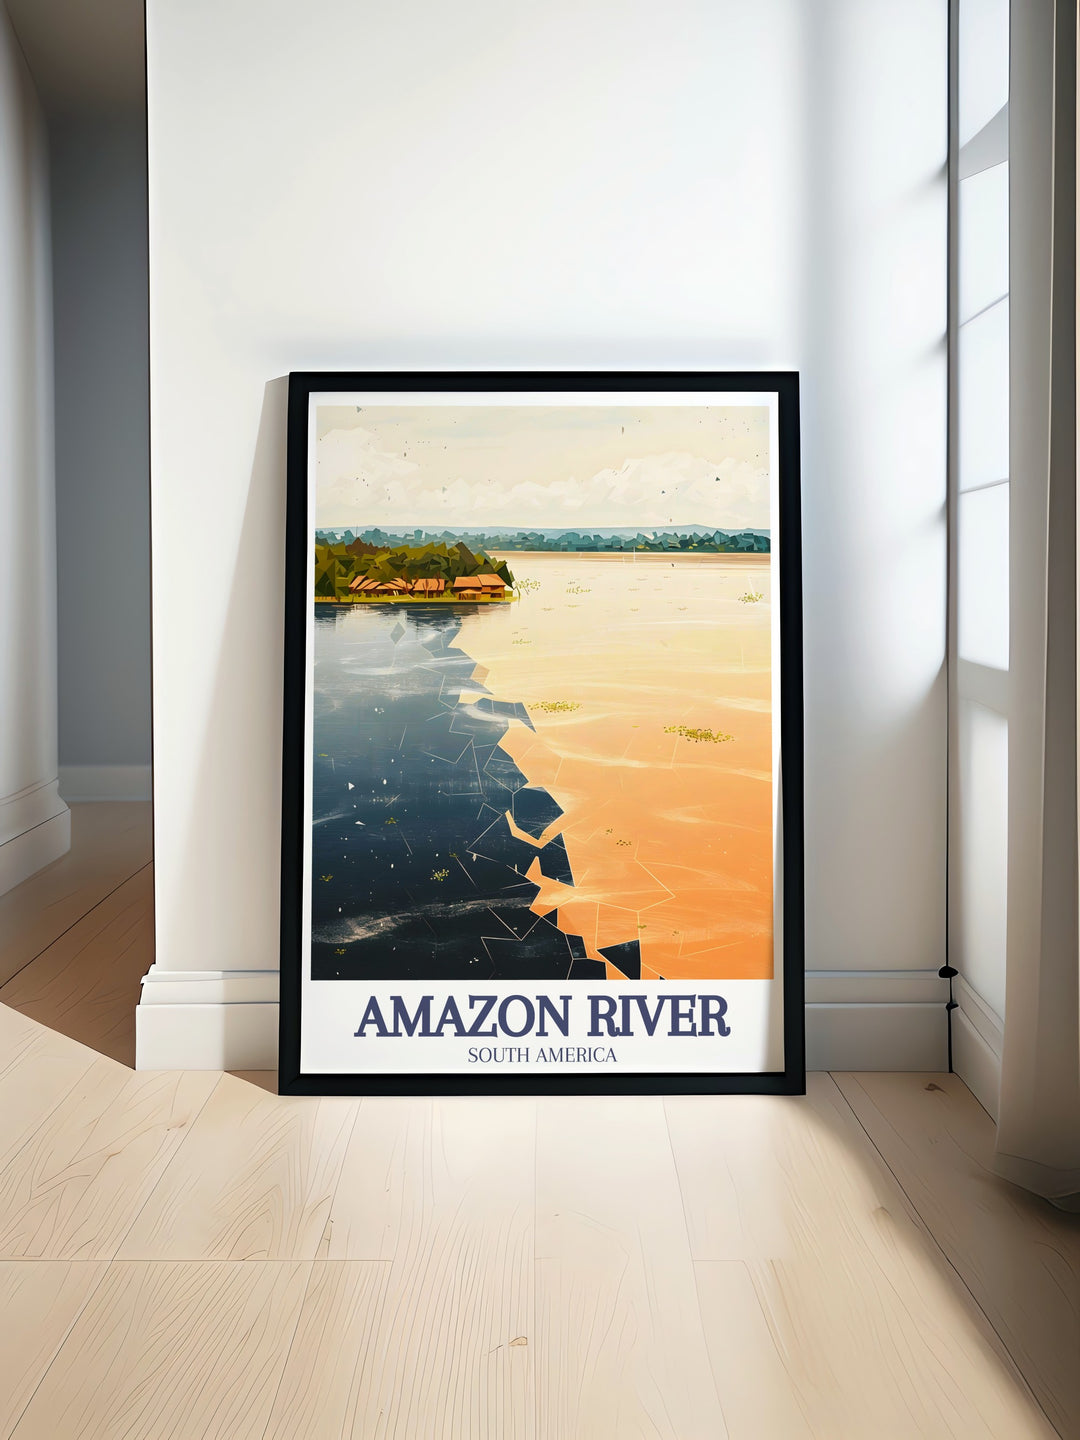 Encontro das Aguas, Rio Negro and Solimoes rivers travel poster featuring the stunning confluence of the two distinct rivers in Brazil. This vibrant wall art brings natures wonder into your home with captivating colors and intricate details, perfect for enhancing any decor.